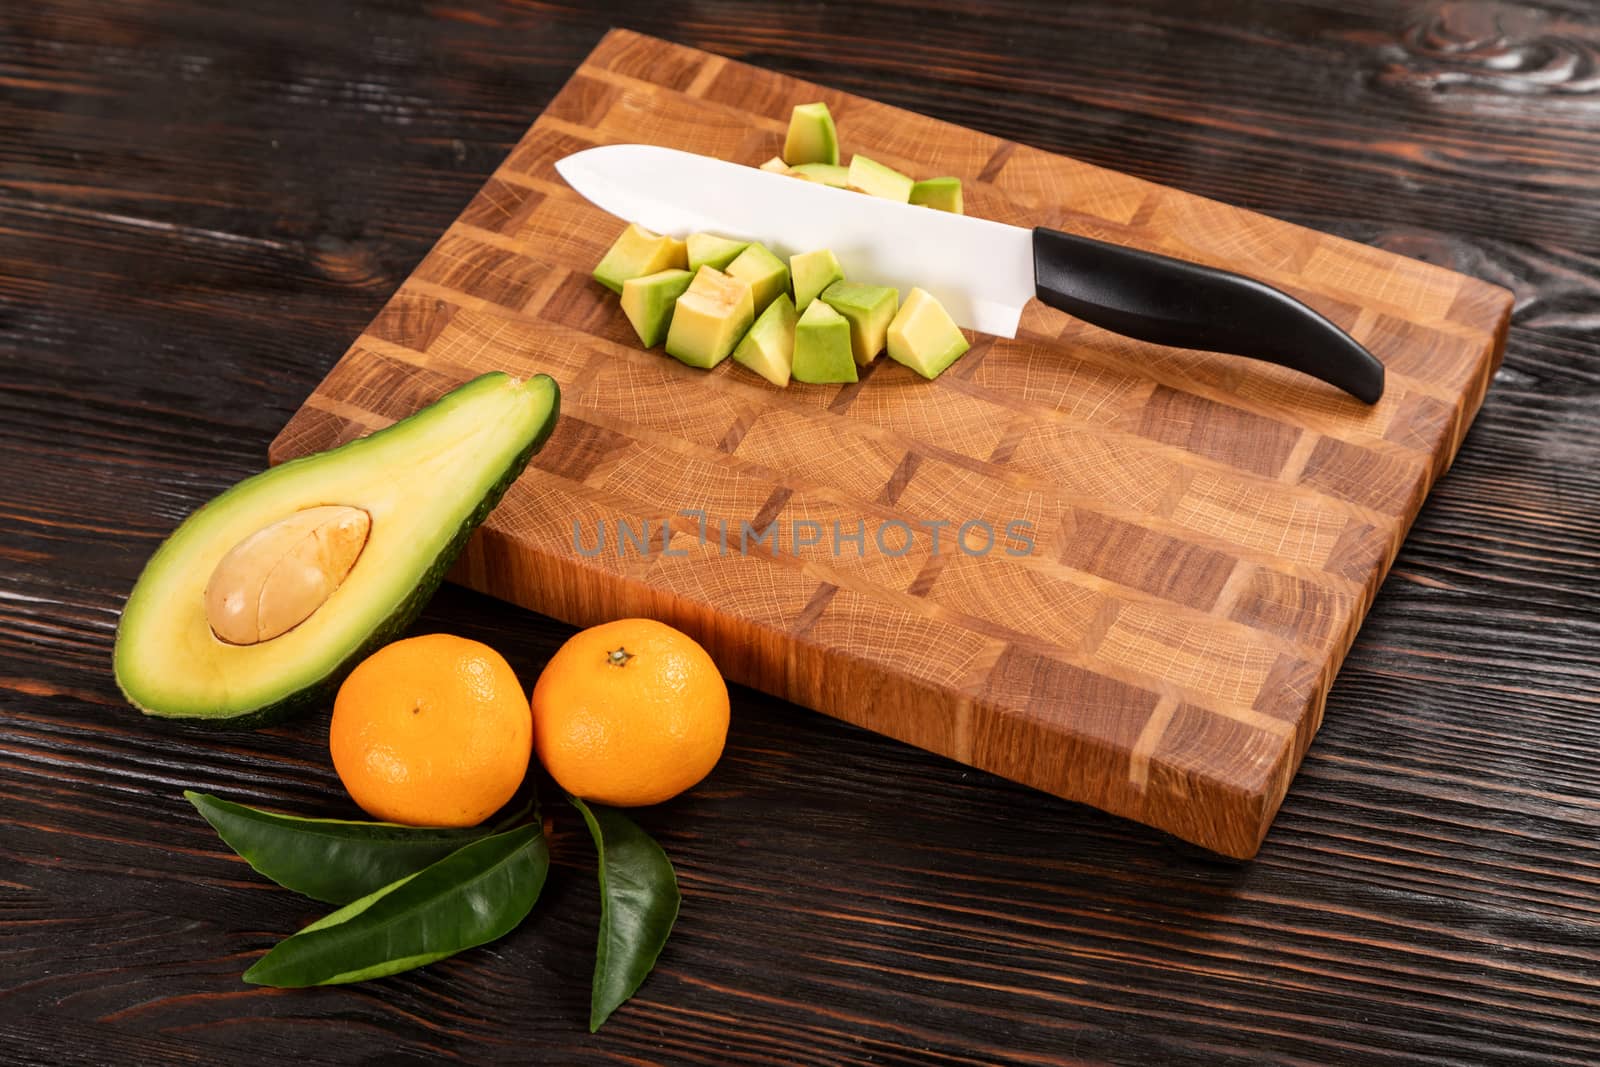 Avocado sliced with cube using knife on wooden cutting board